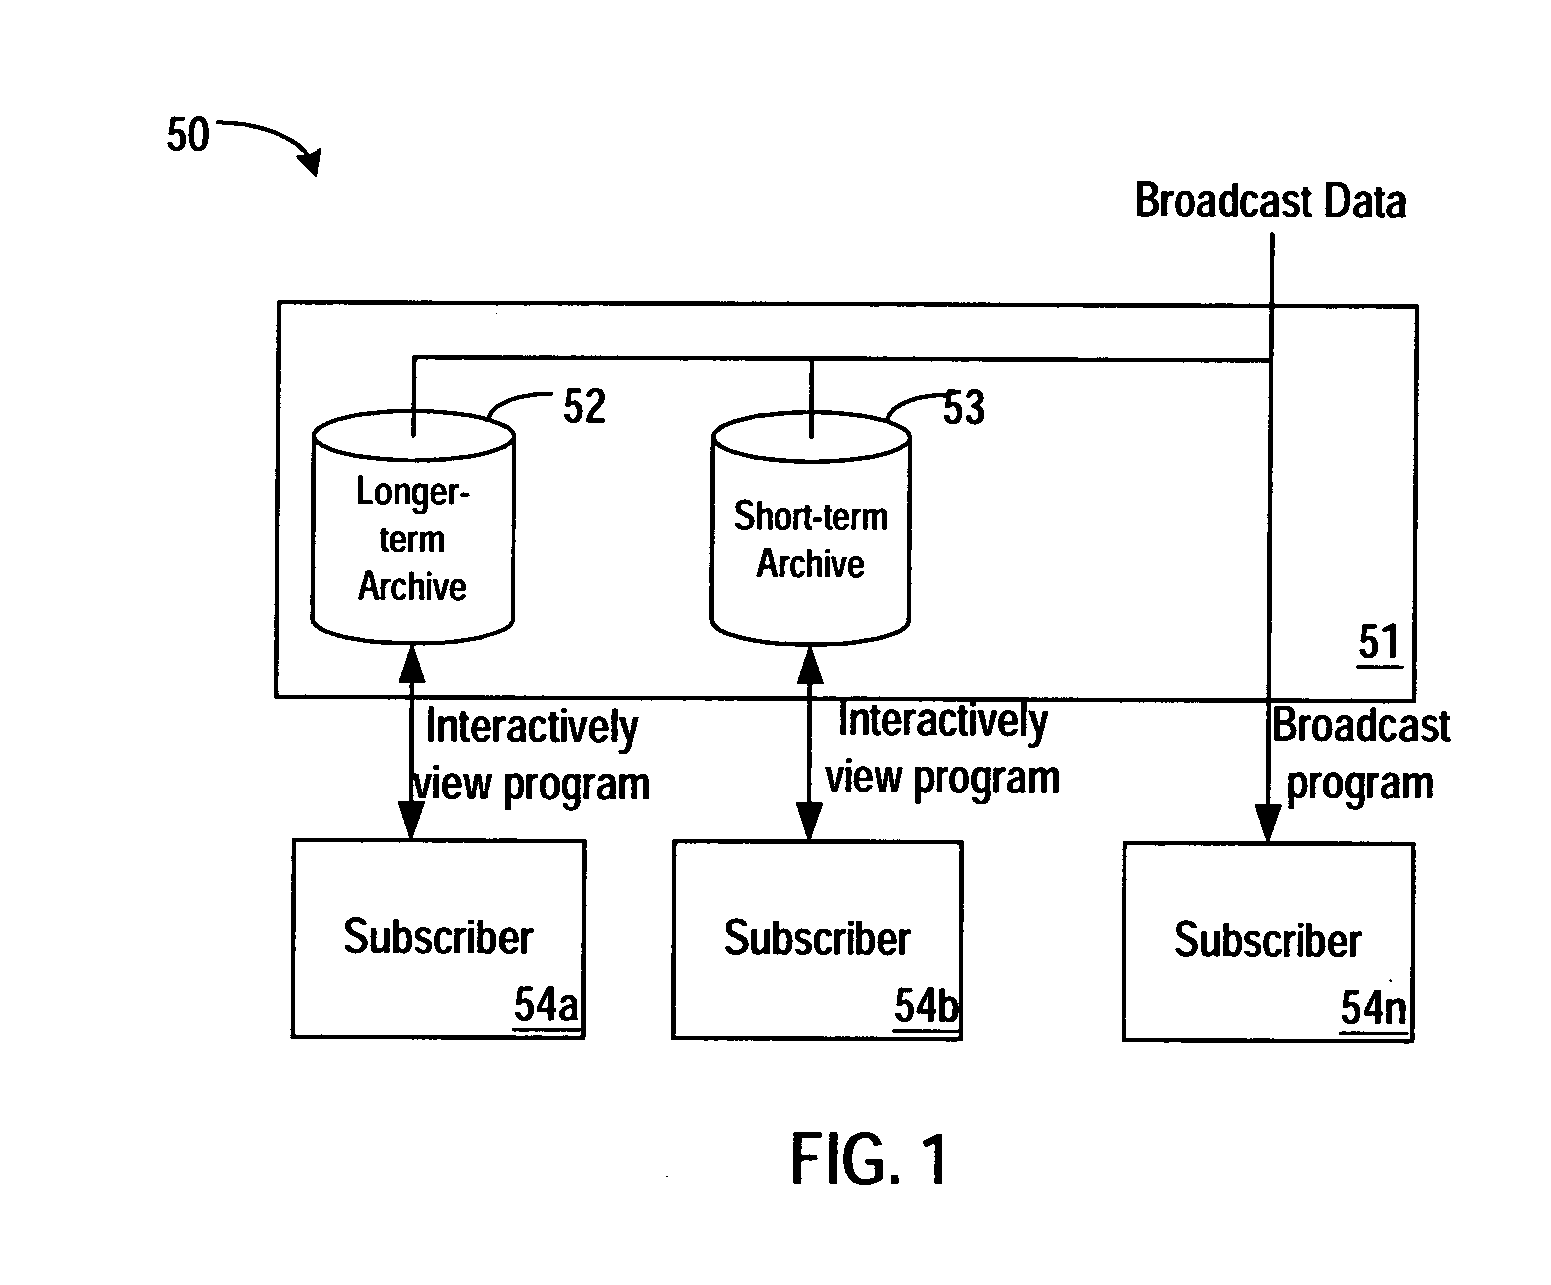 System and method for identification and insertion of advertising in broadcast programs